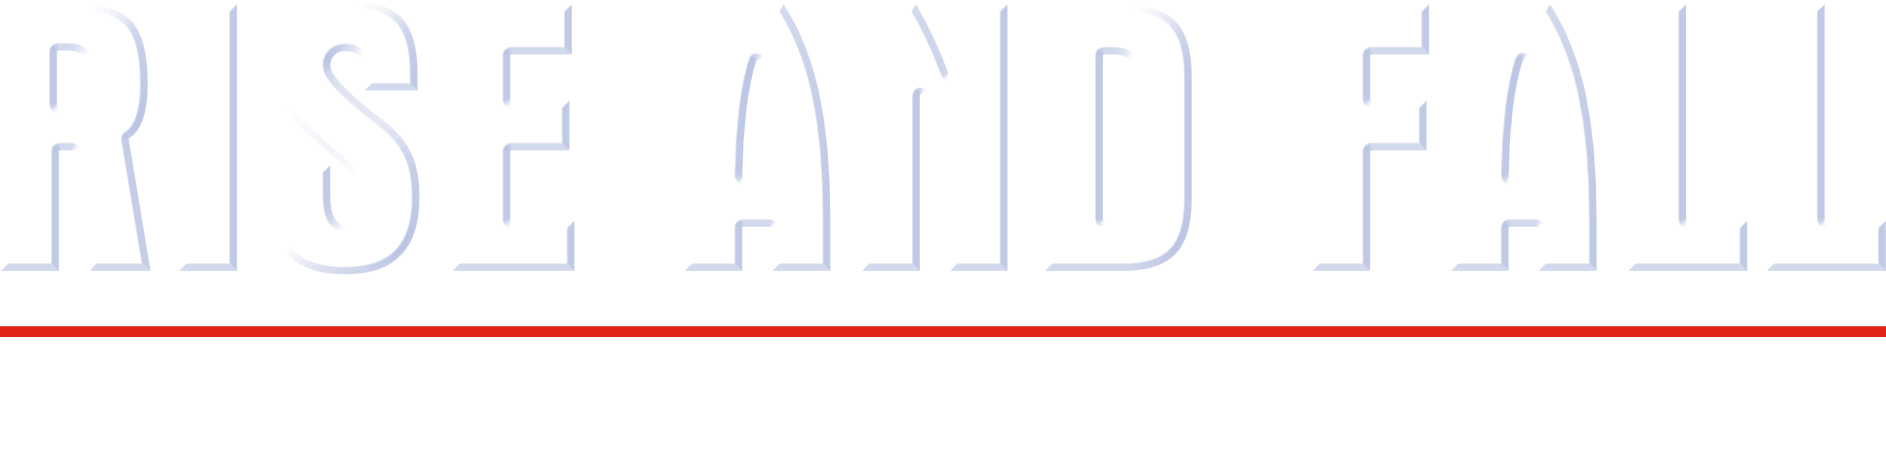 Rise And Fall Logo Finale